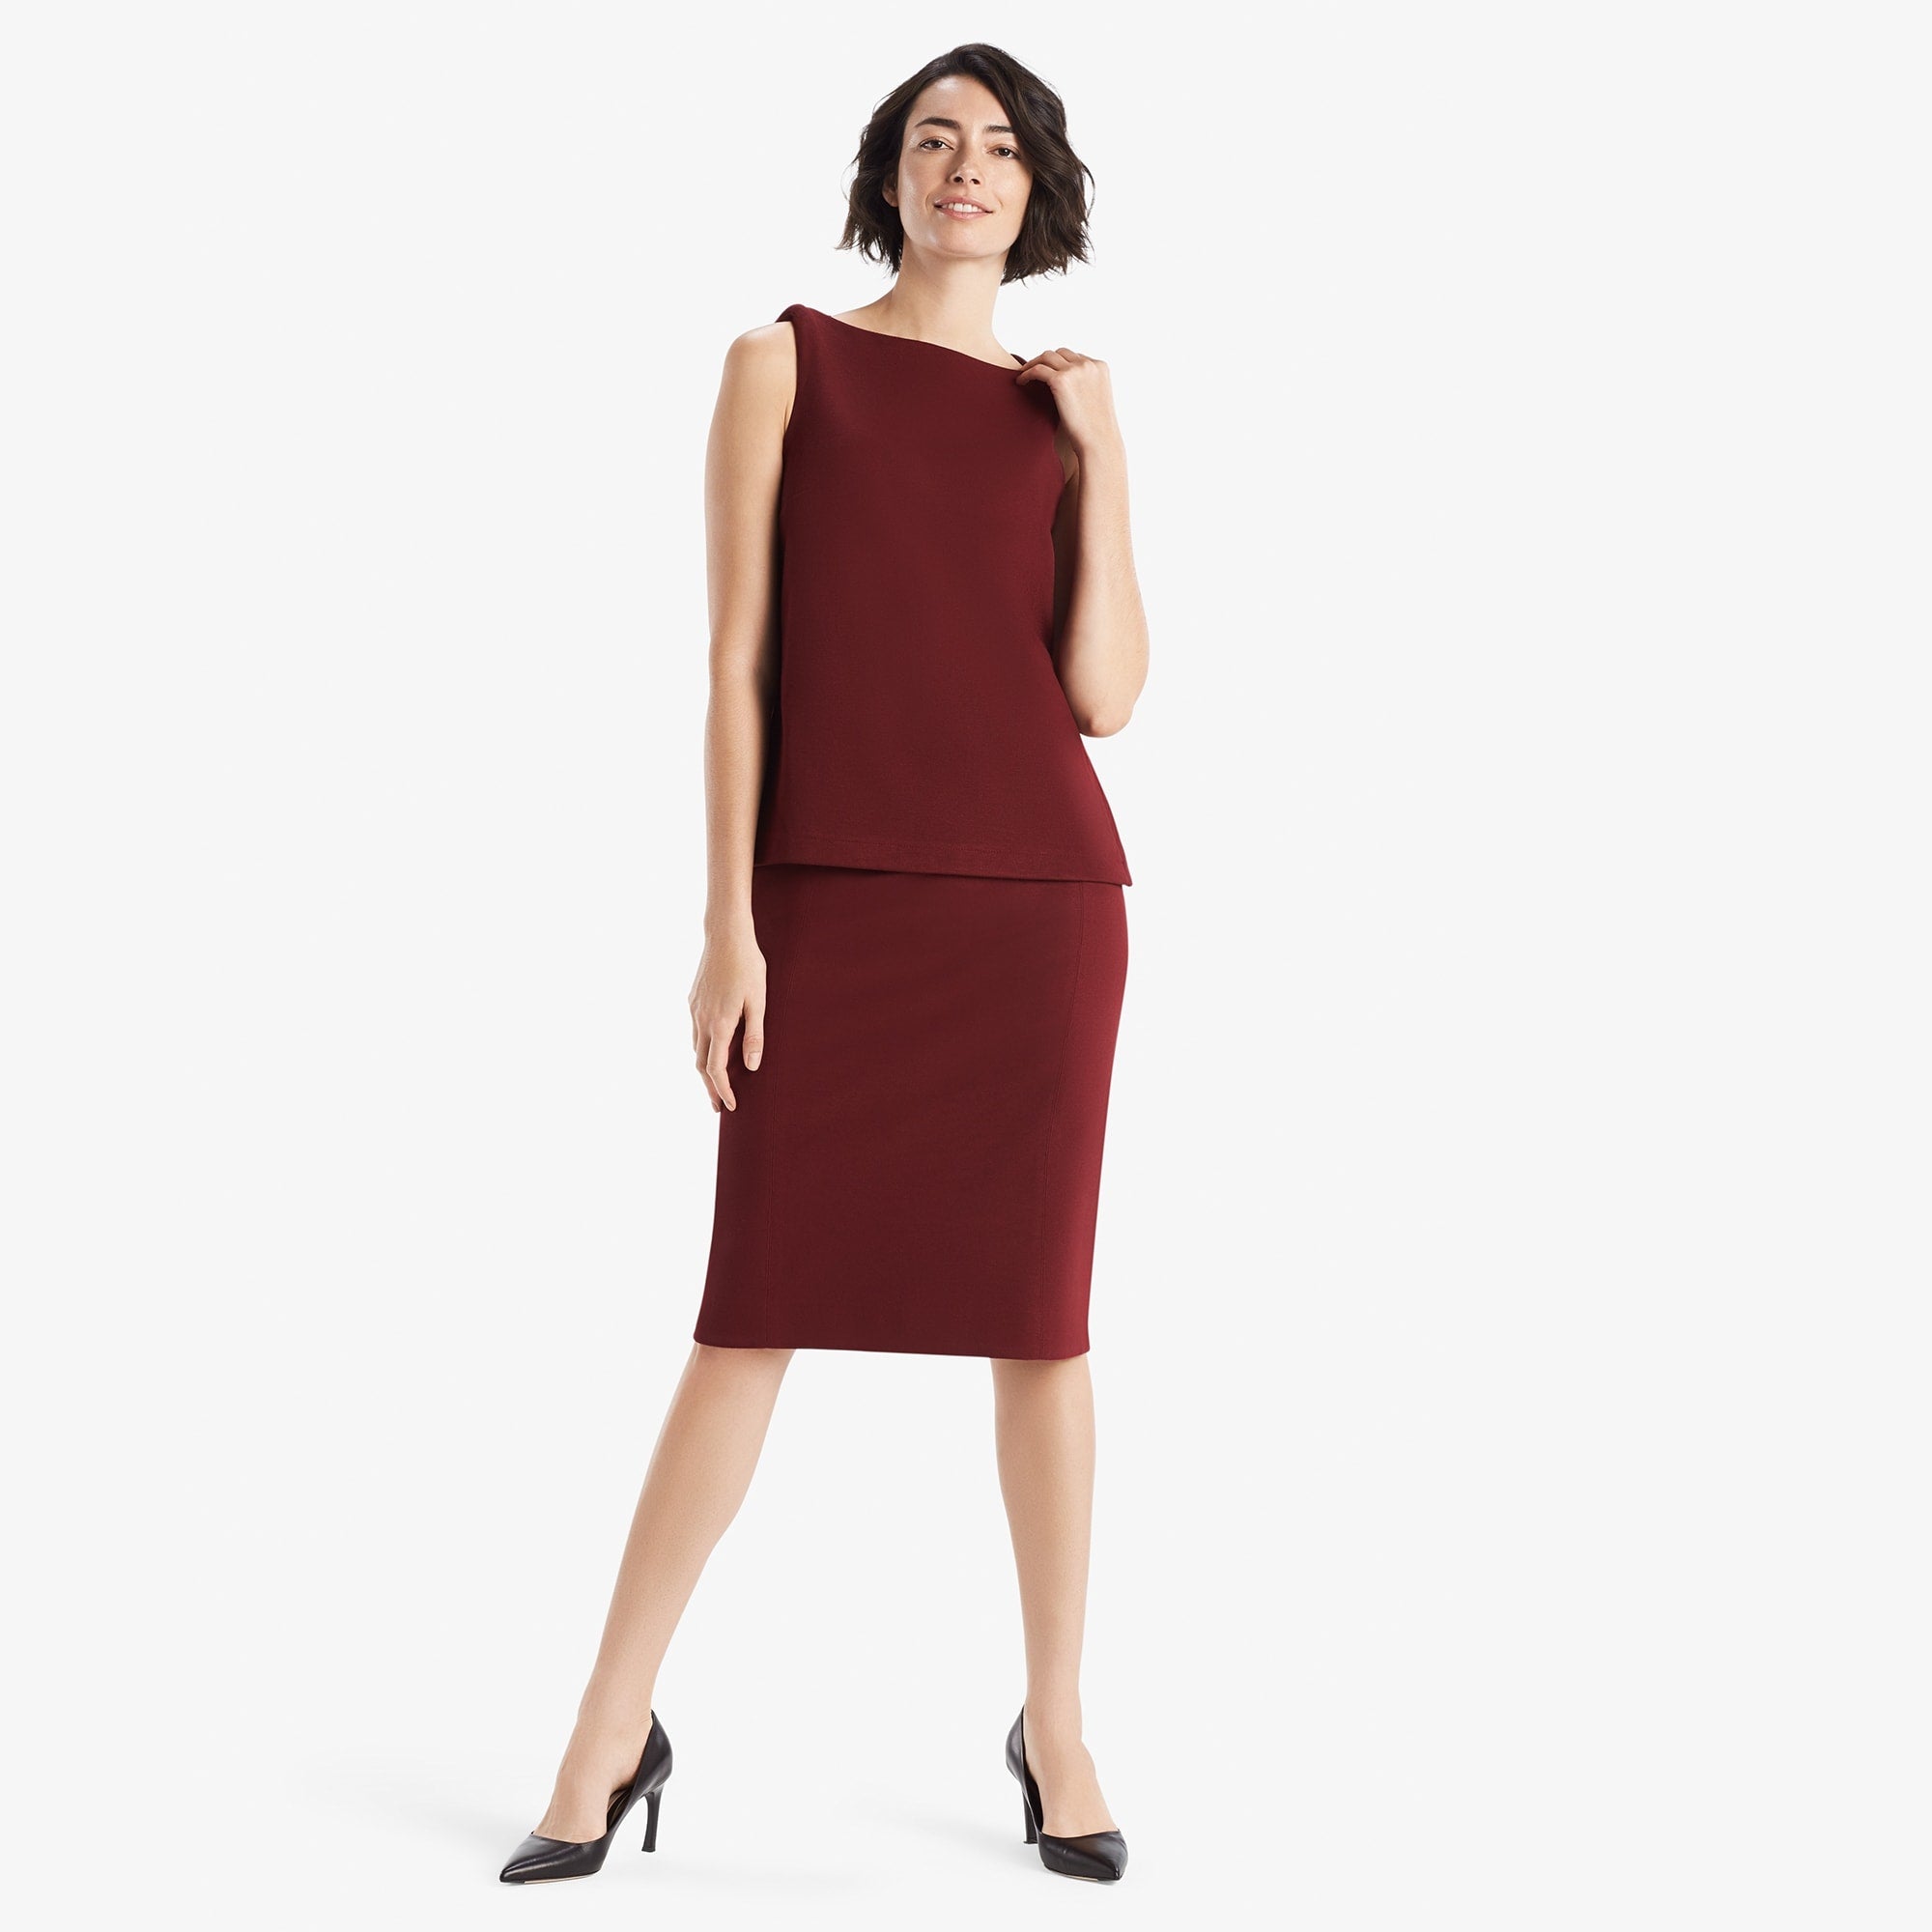 Front image of a woman standing wearing the Dorchester skirt in pinot